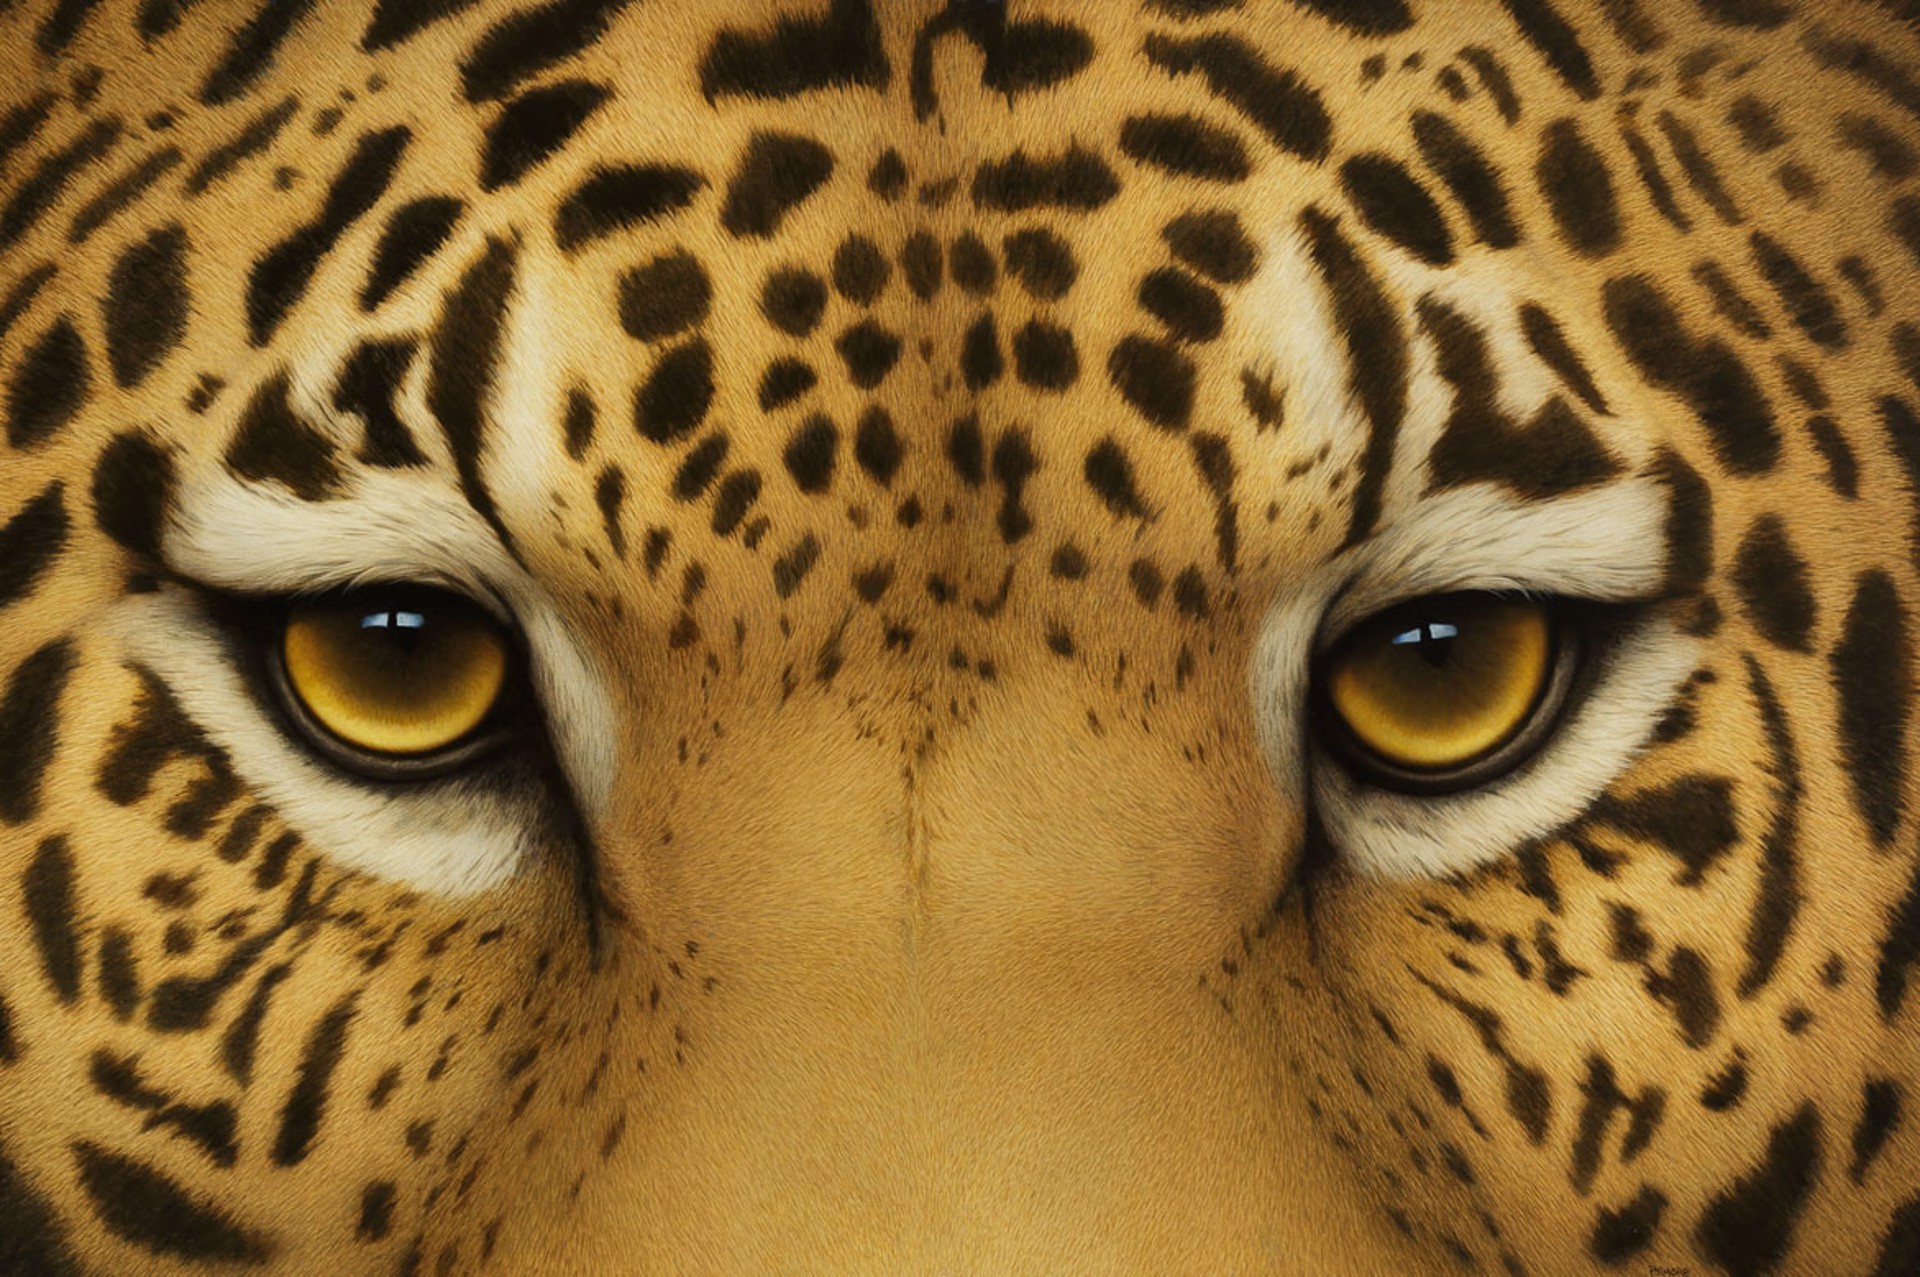 Leopard Eyes by Tom Palmore